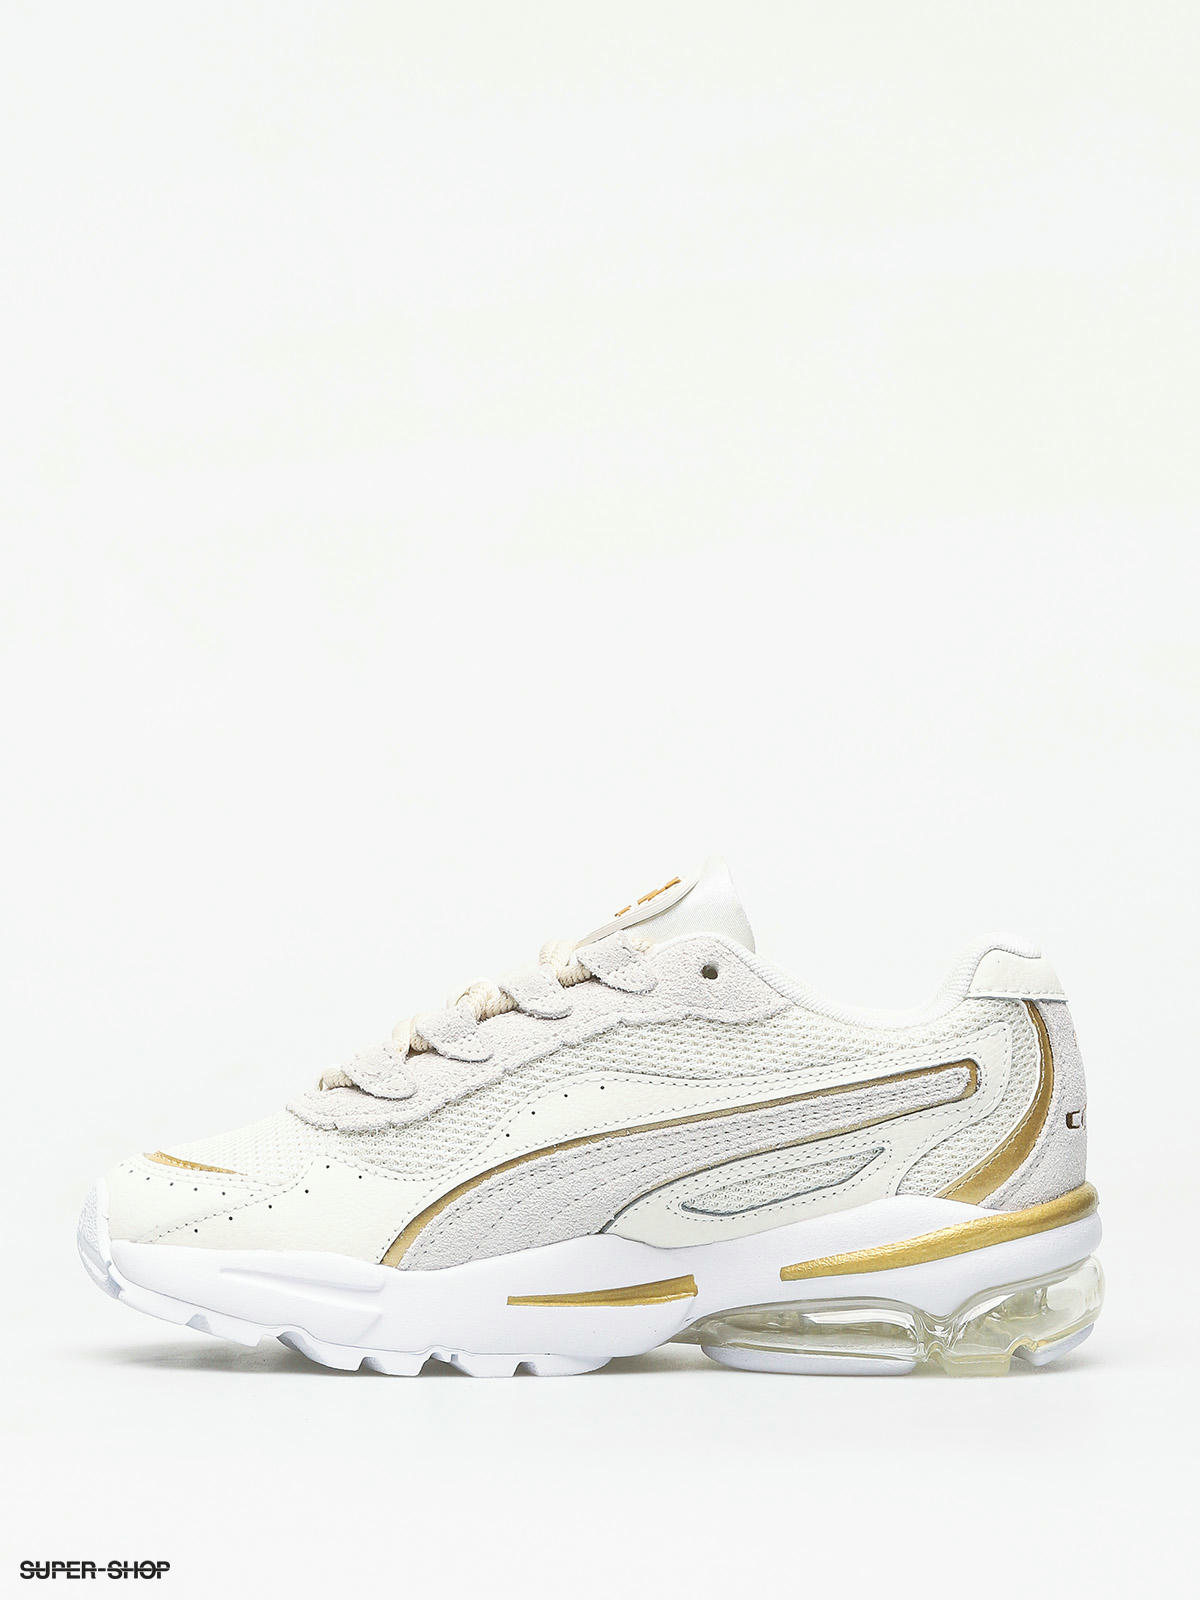 puma shoes white and gold